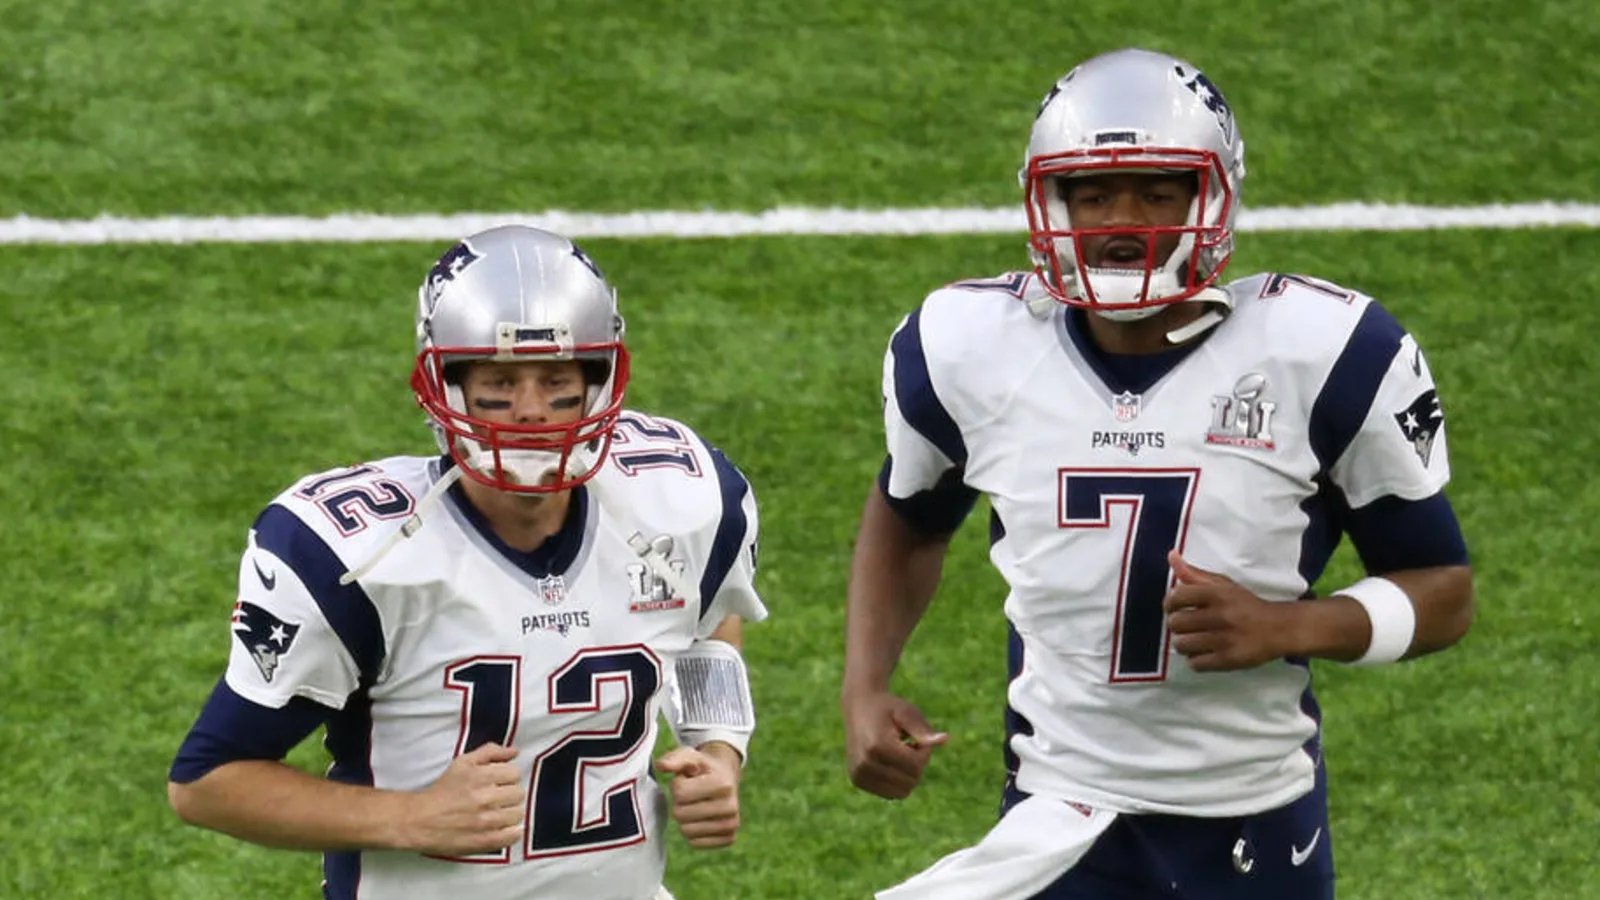 BREAKING NEWS: Jacoby Brissett Responds To Talk About Tom Brady’s Comeback